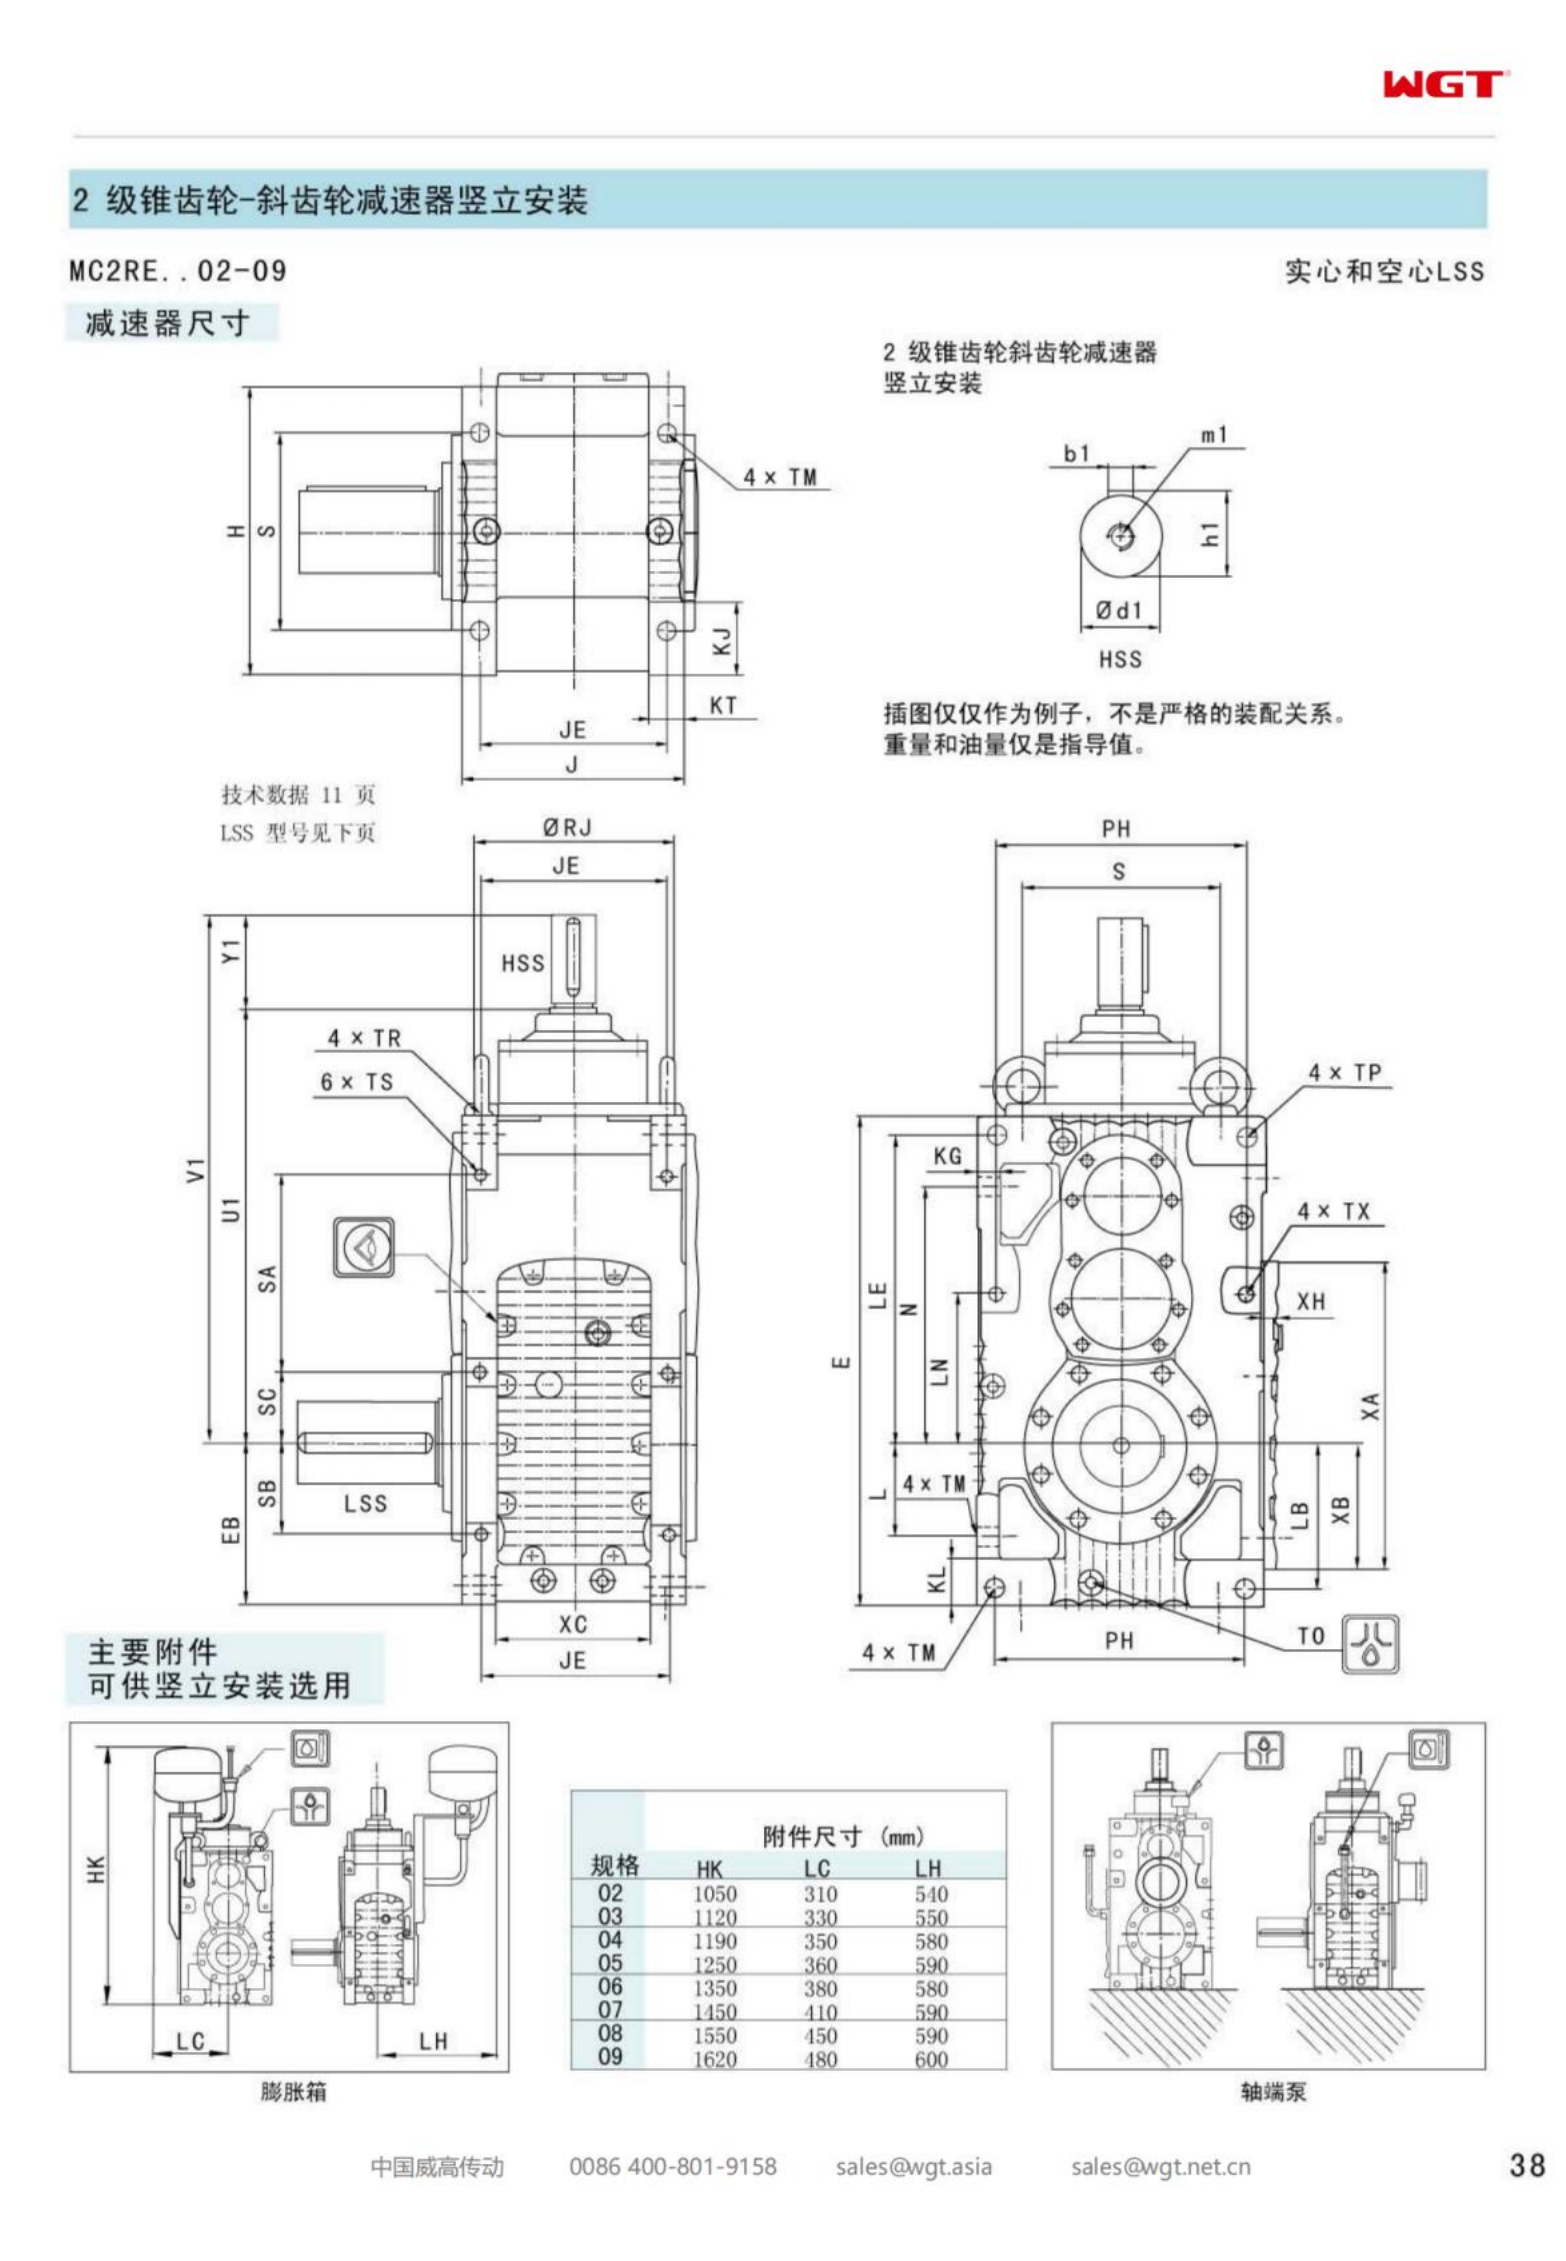 MC2RESF08 Replace_SEW_MC_Series Gearbox